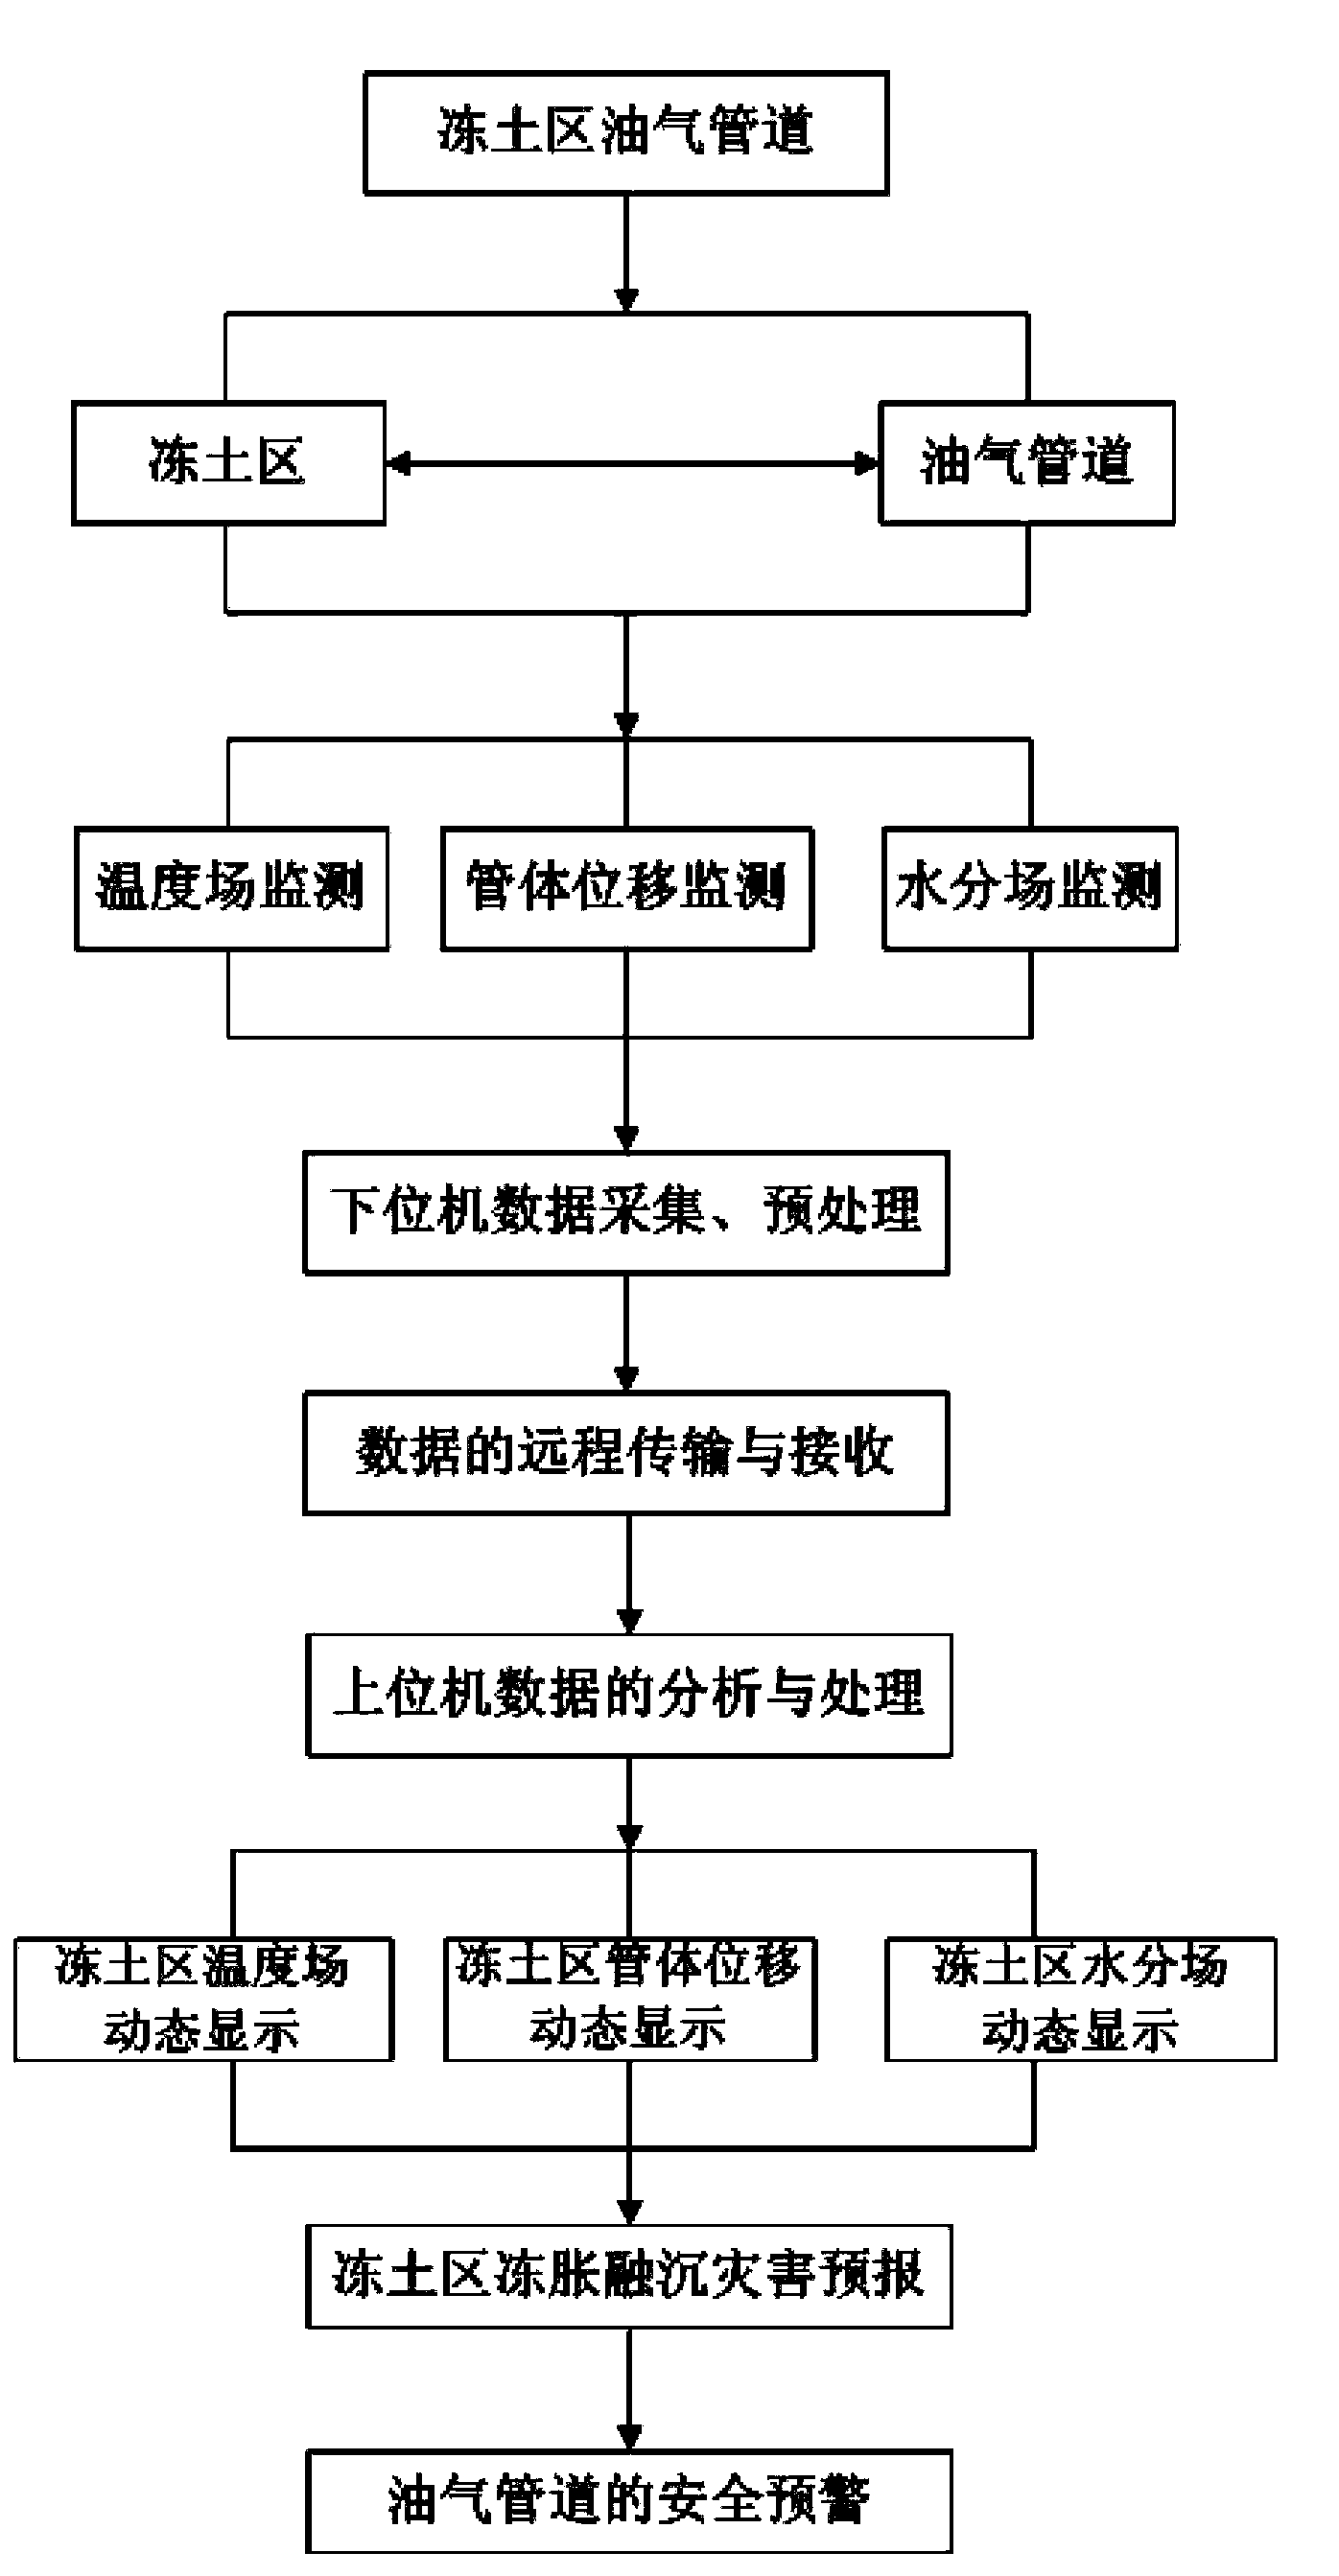 Freeze soil area oil and gas pipeline monitoring method